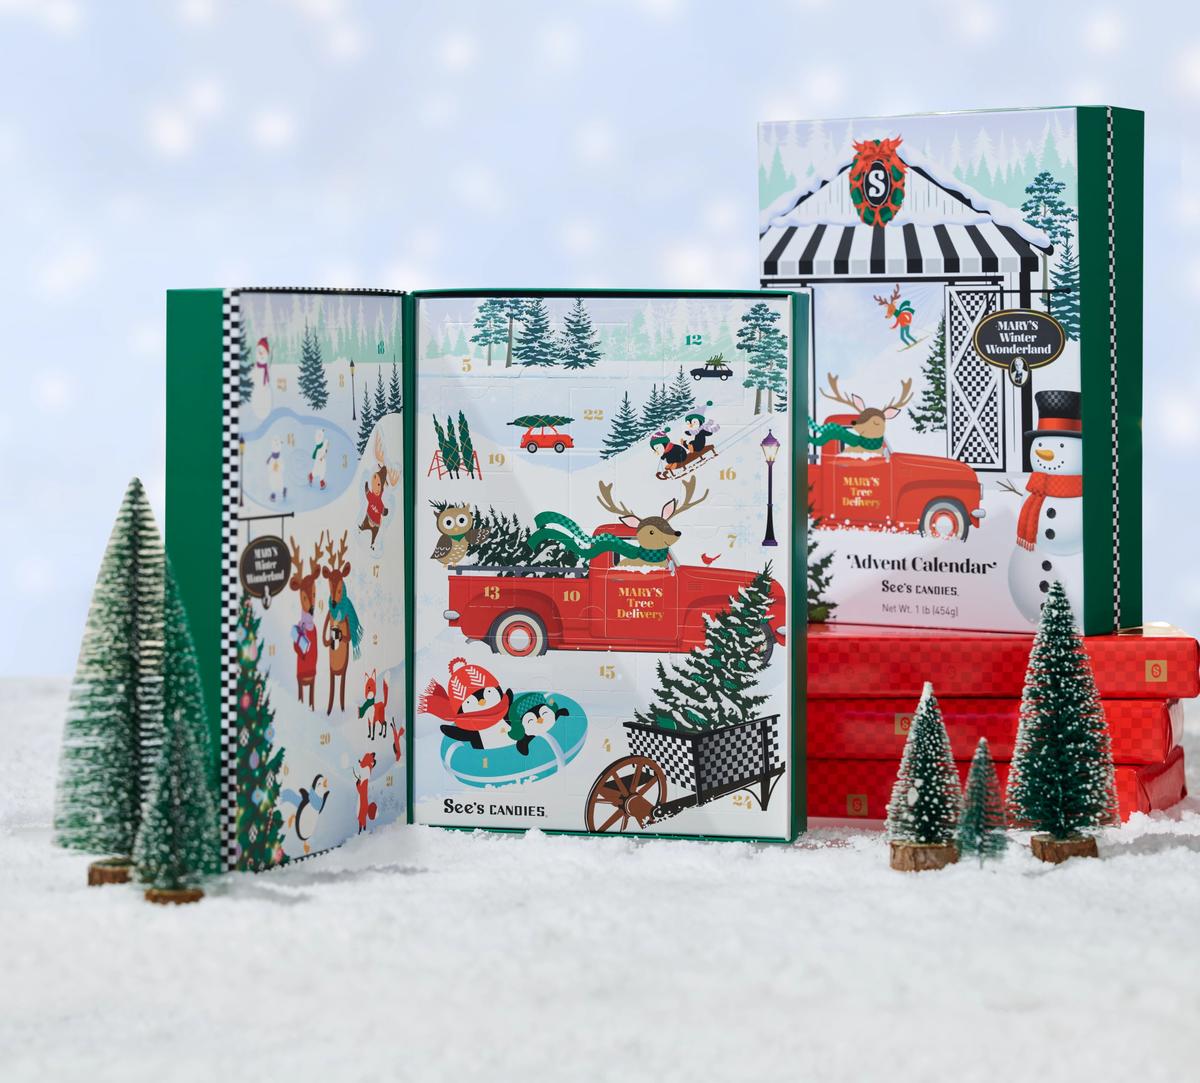 See’s Candies Advent Calendar. (Courtesy of See's)